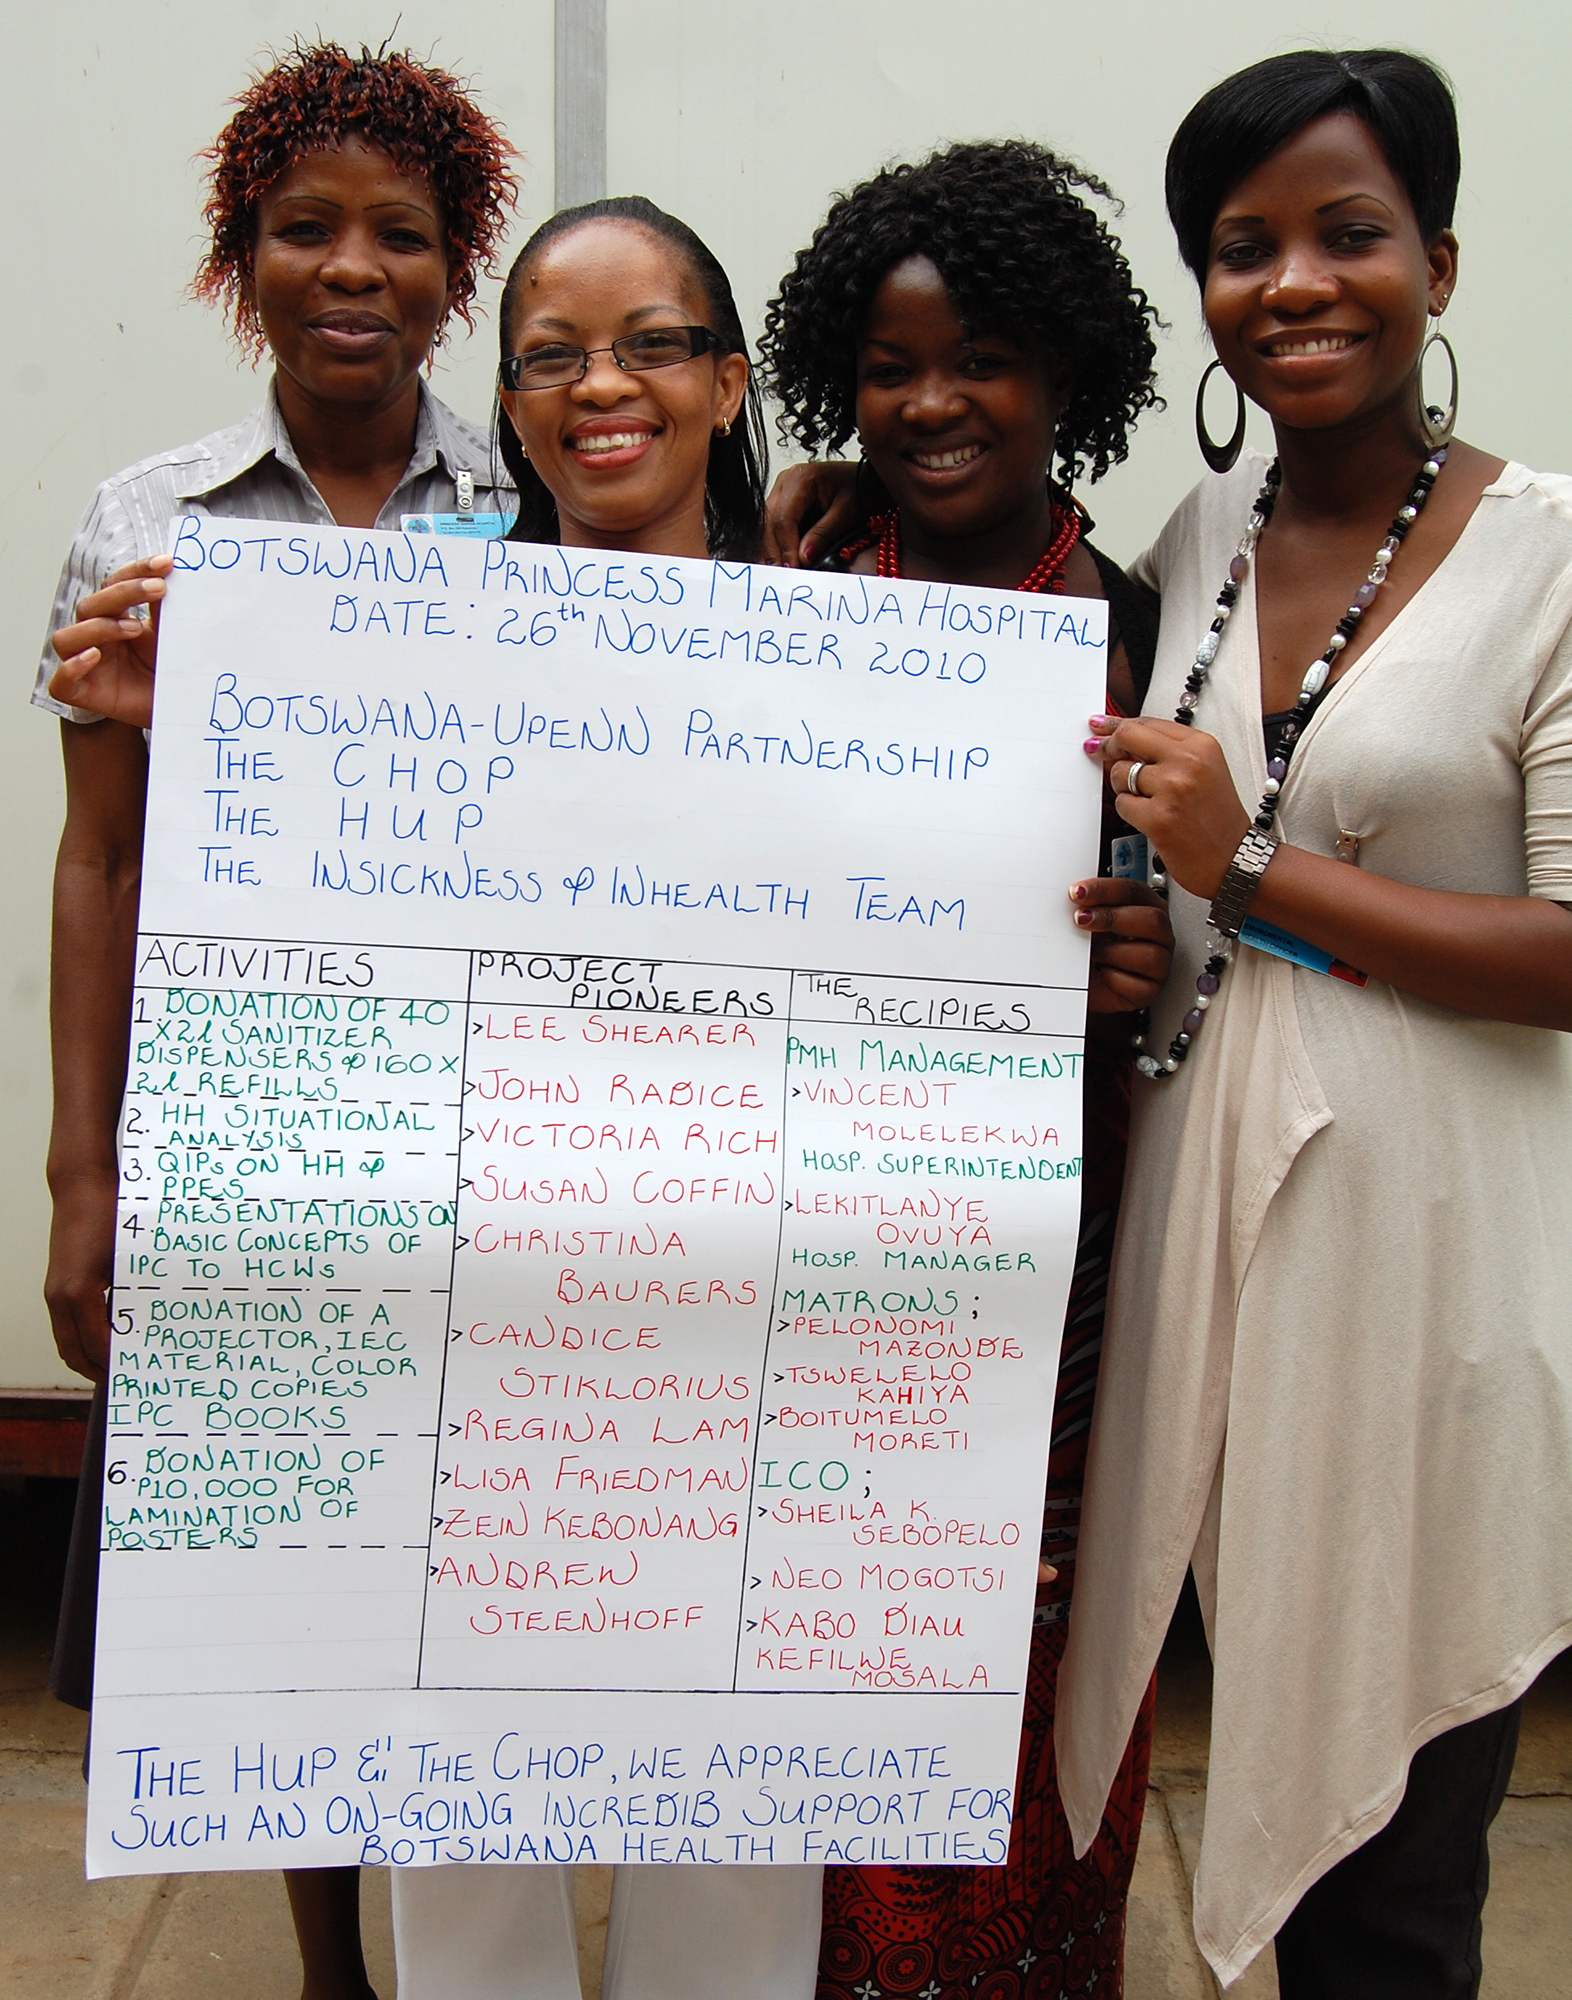 Four people standing holding a large sign with handwritten information about Upenn-Botswana program.